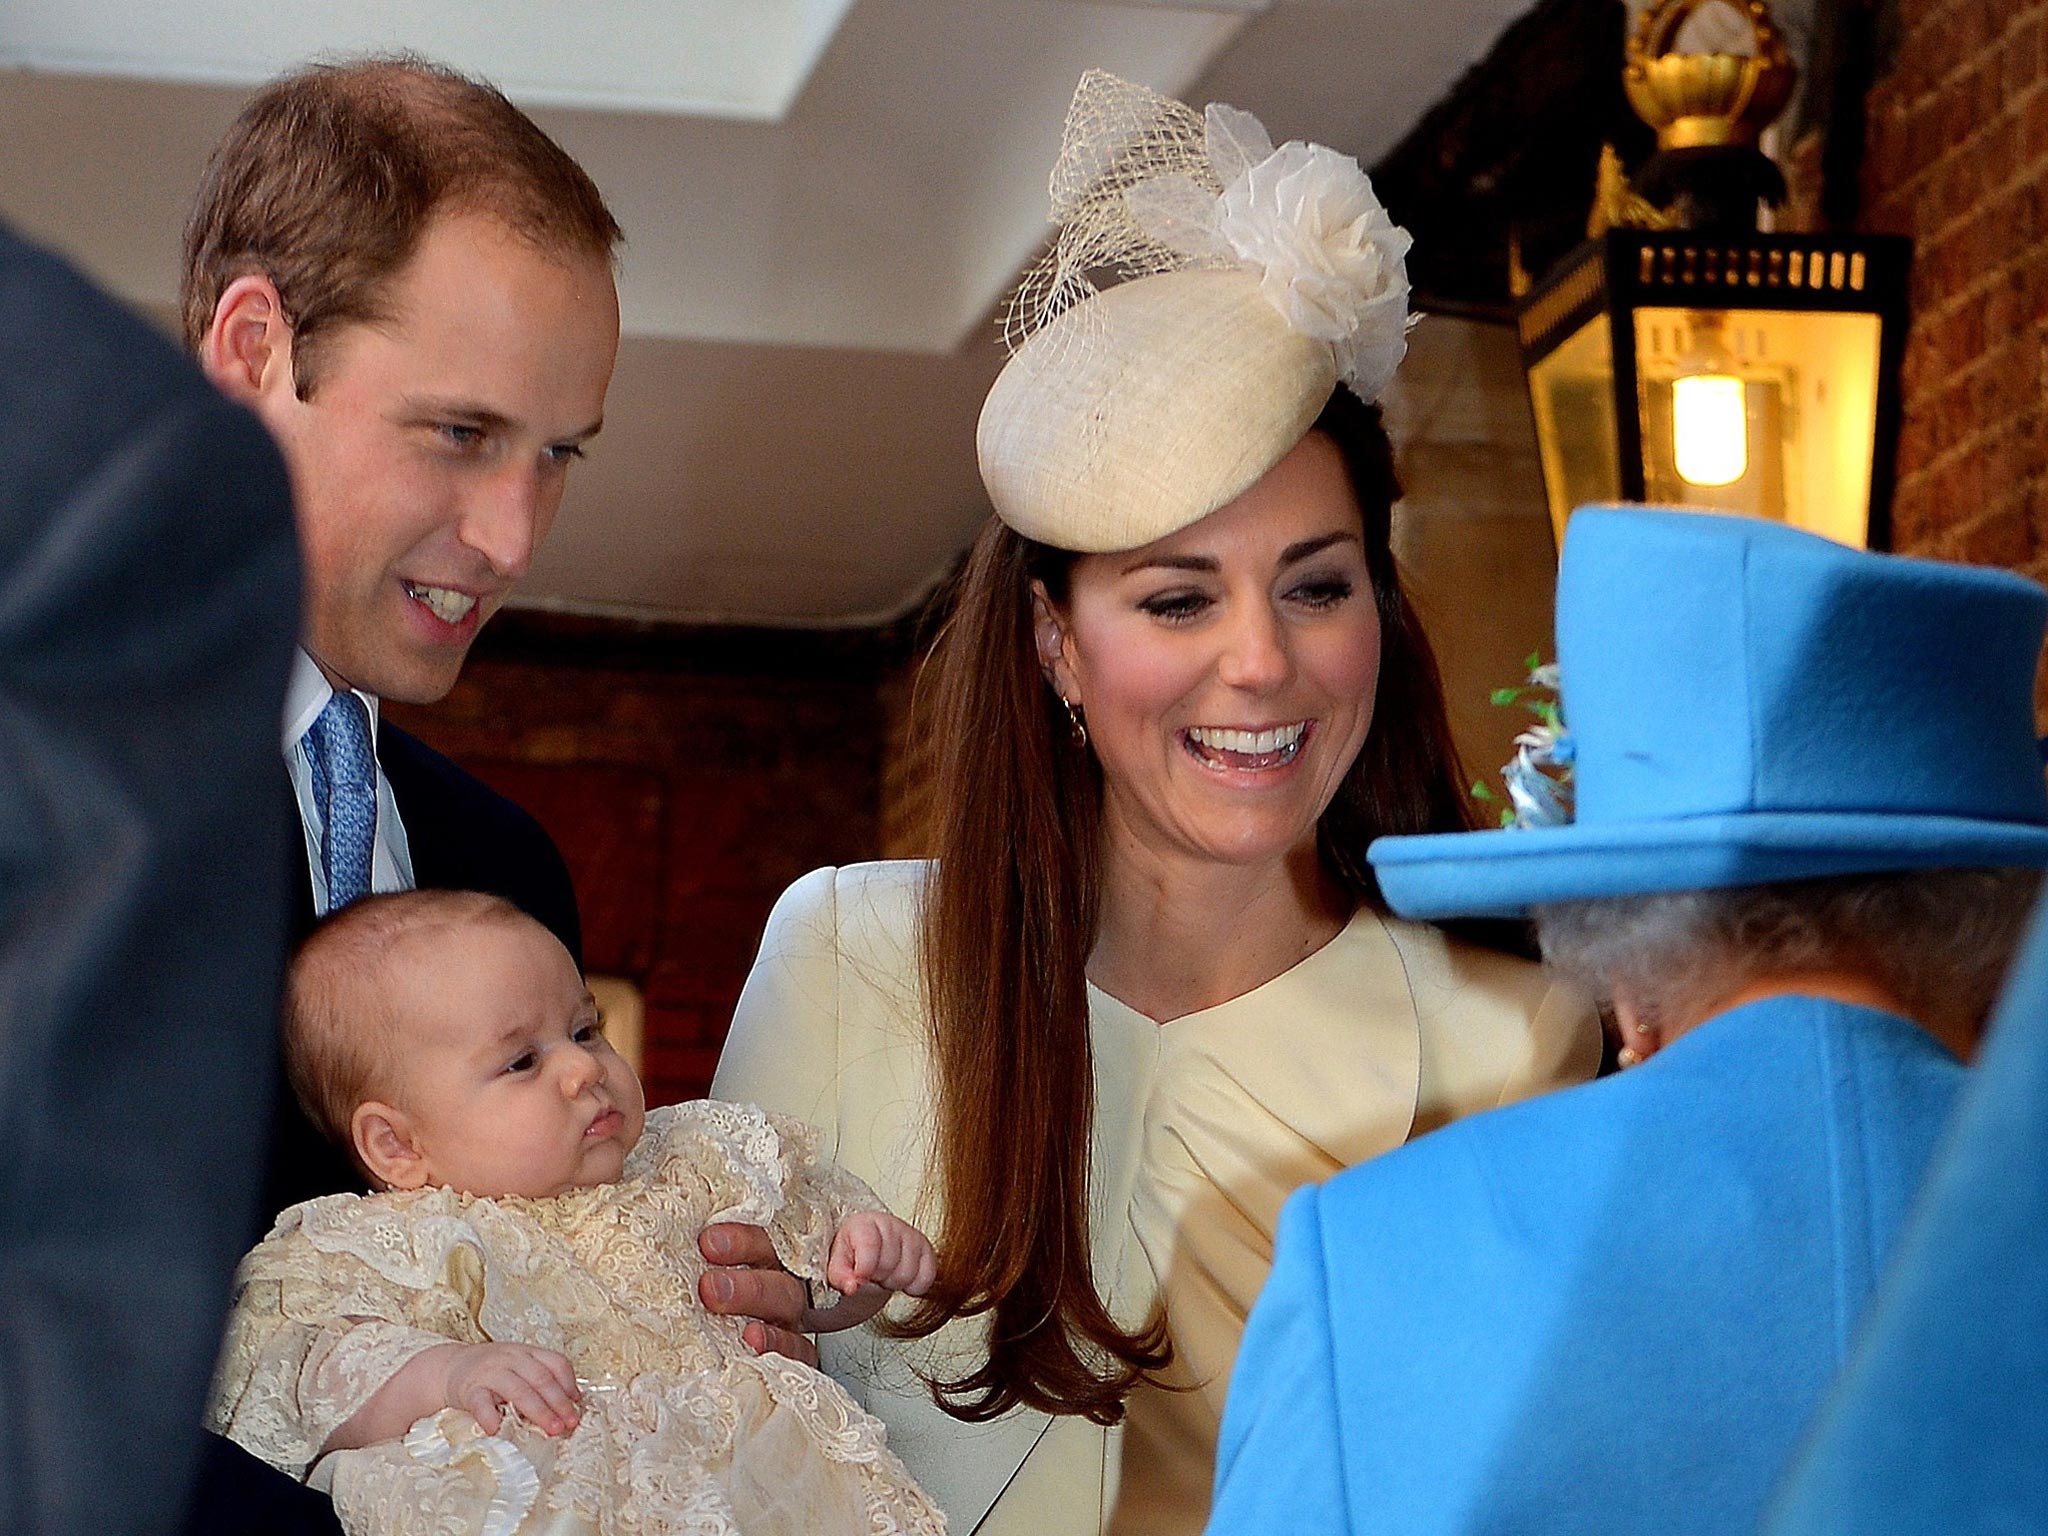 Britain's Prince William, Duke of Cambridge and his wife Catherine, Duchess of Cambridge, speak with Queen Elizabeth II as they hold their son Prince George of Cambridge at Chapel Royal in St James's Palace